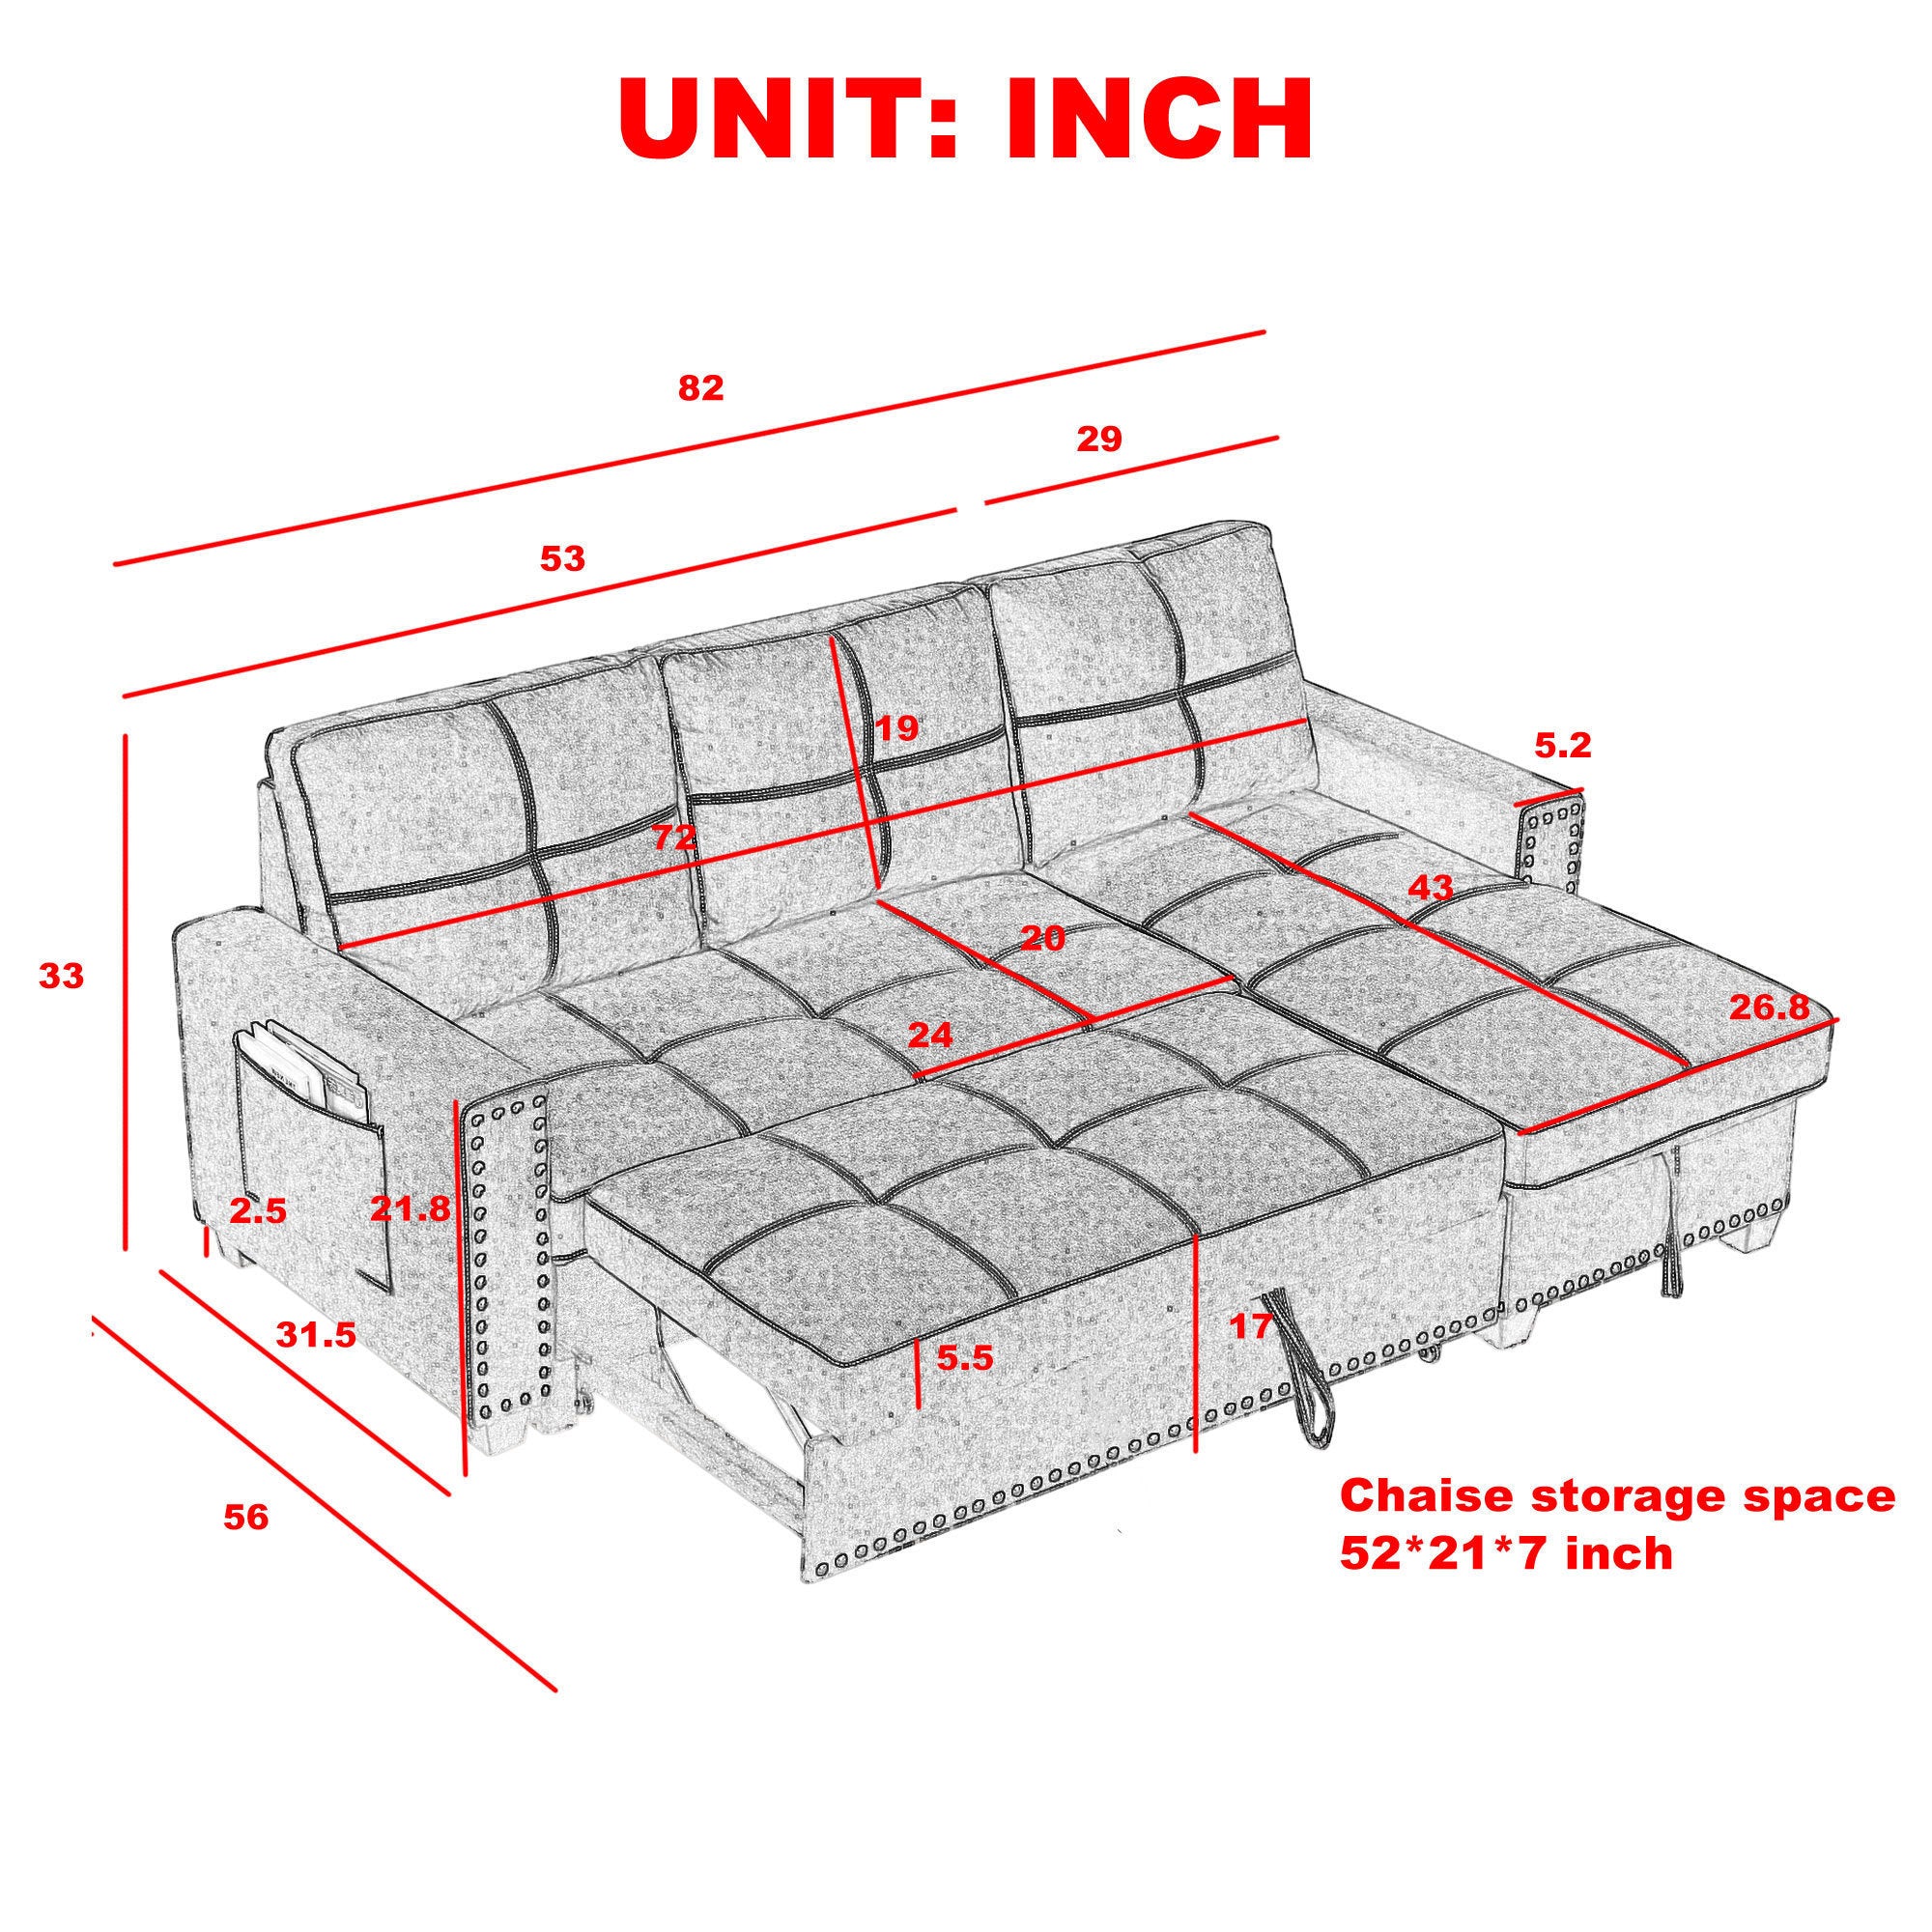 82" Reversible Sleeper Sectional w/ Storage-Sleeper Sectionals-American Furniture Outlet